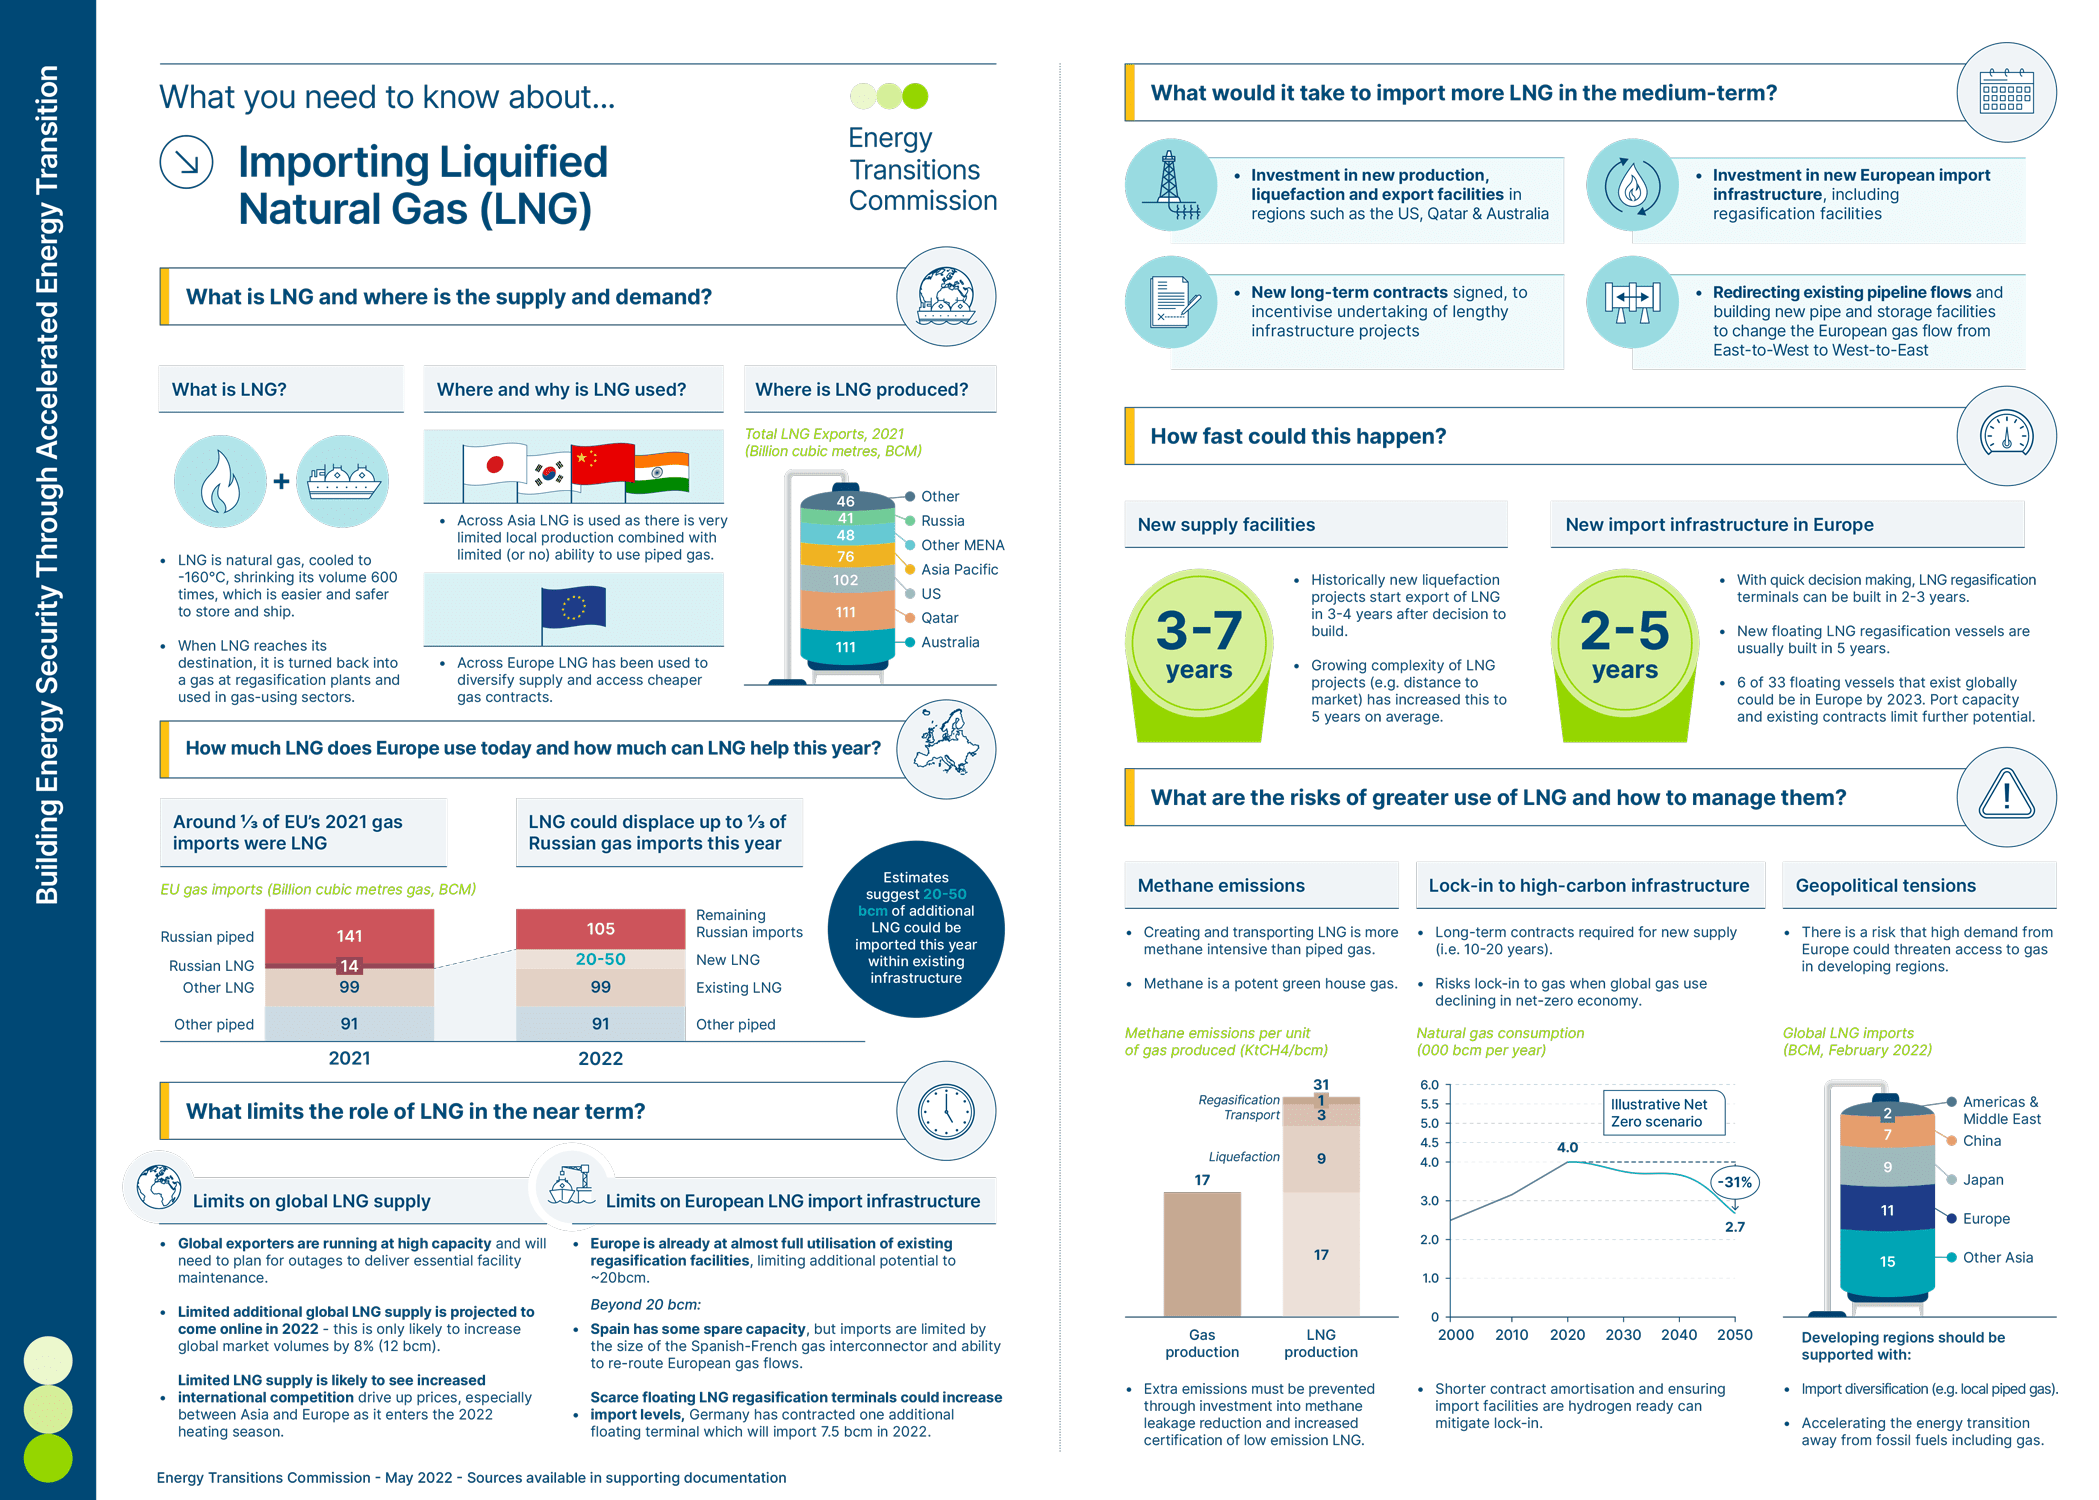 Infographic: Importing Liquified Natural Gas (LNG)